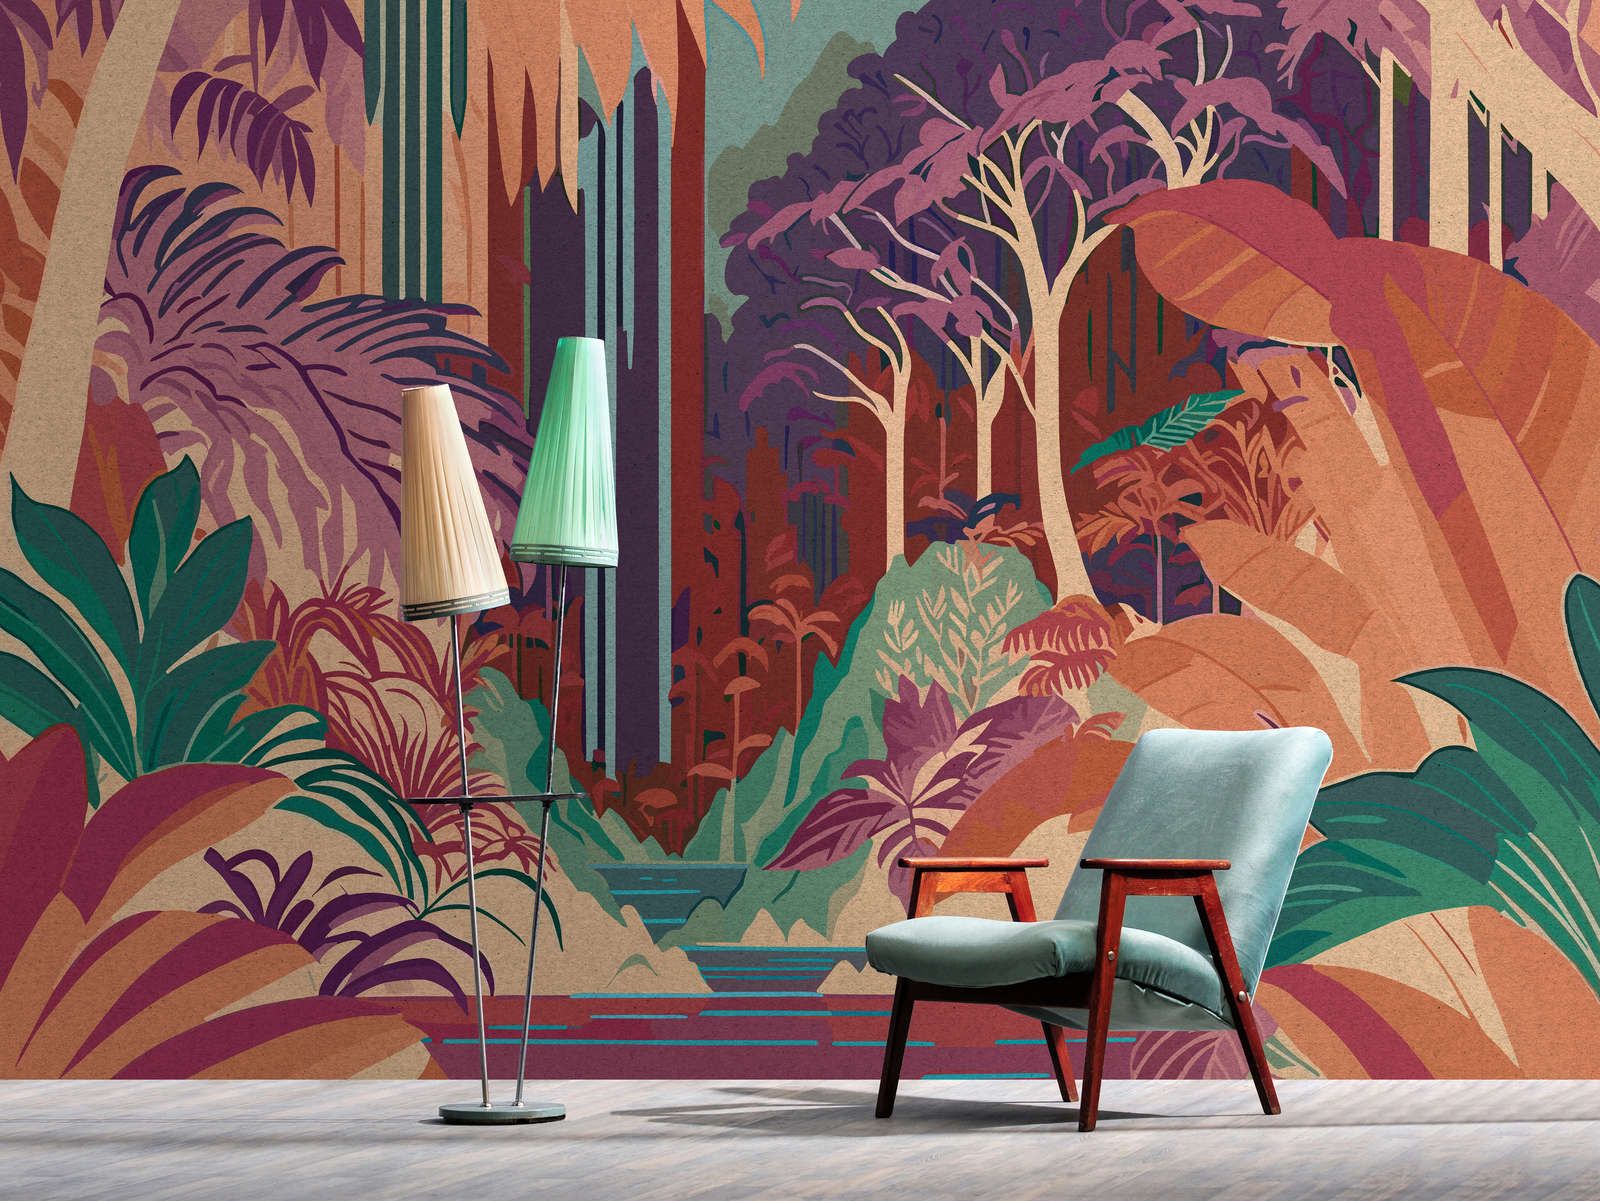             Photo wallpaper »rhea« - Abstract jungle motif with kraft paper texture - Lightly textured non-woven fabric
        